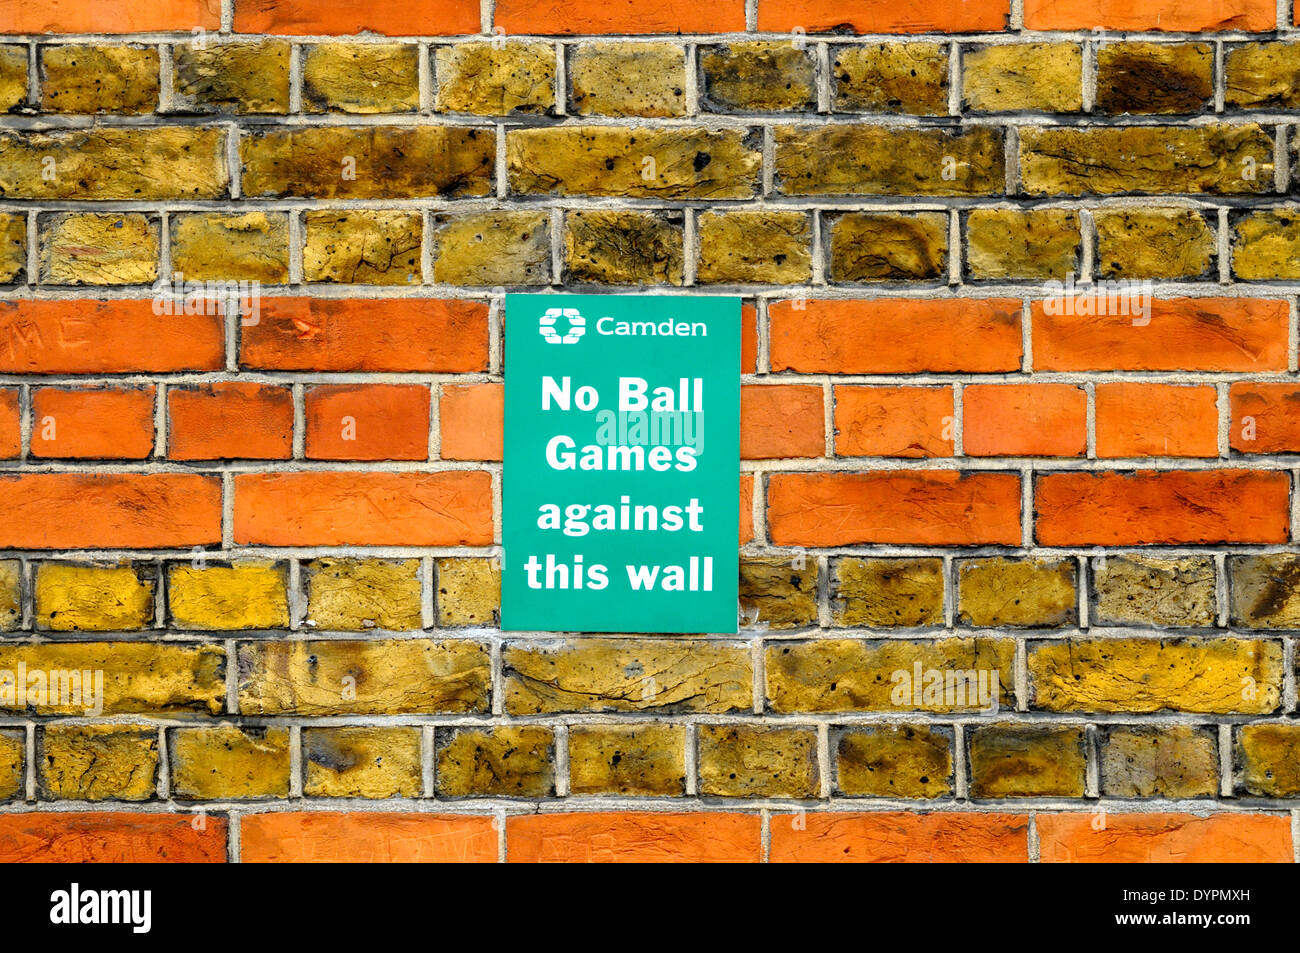 London, England, UK. 'No Ball Games against this wall' sign in Macklin Street, Camden Stock Photo